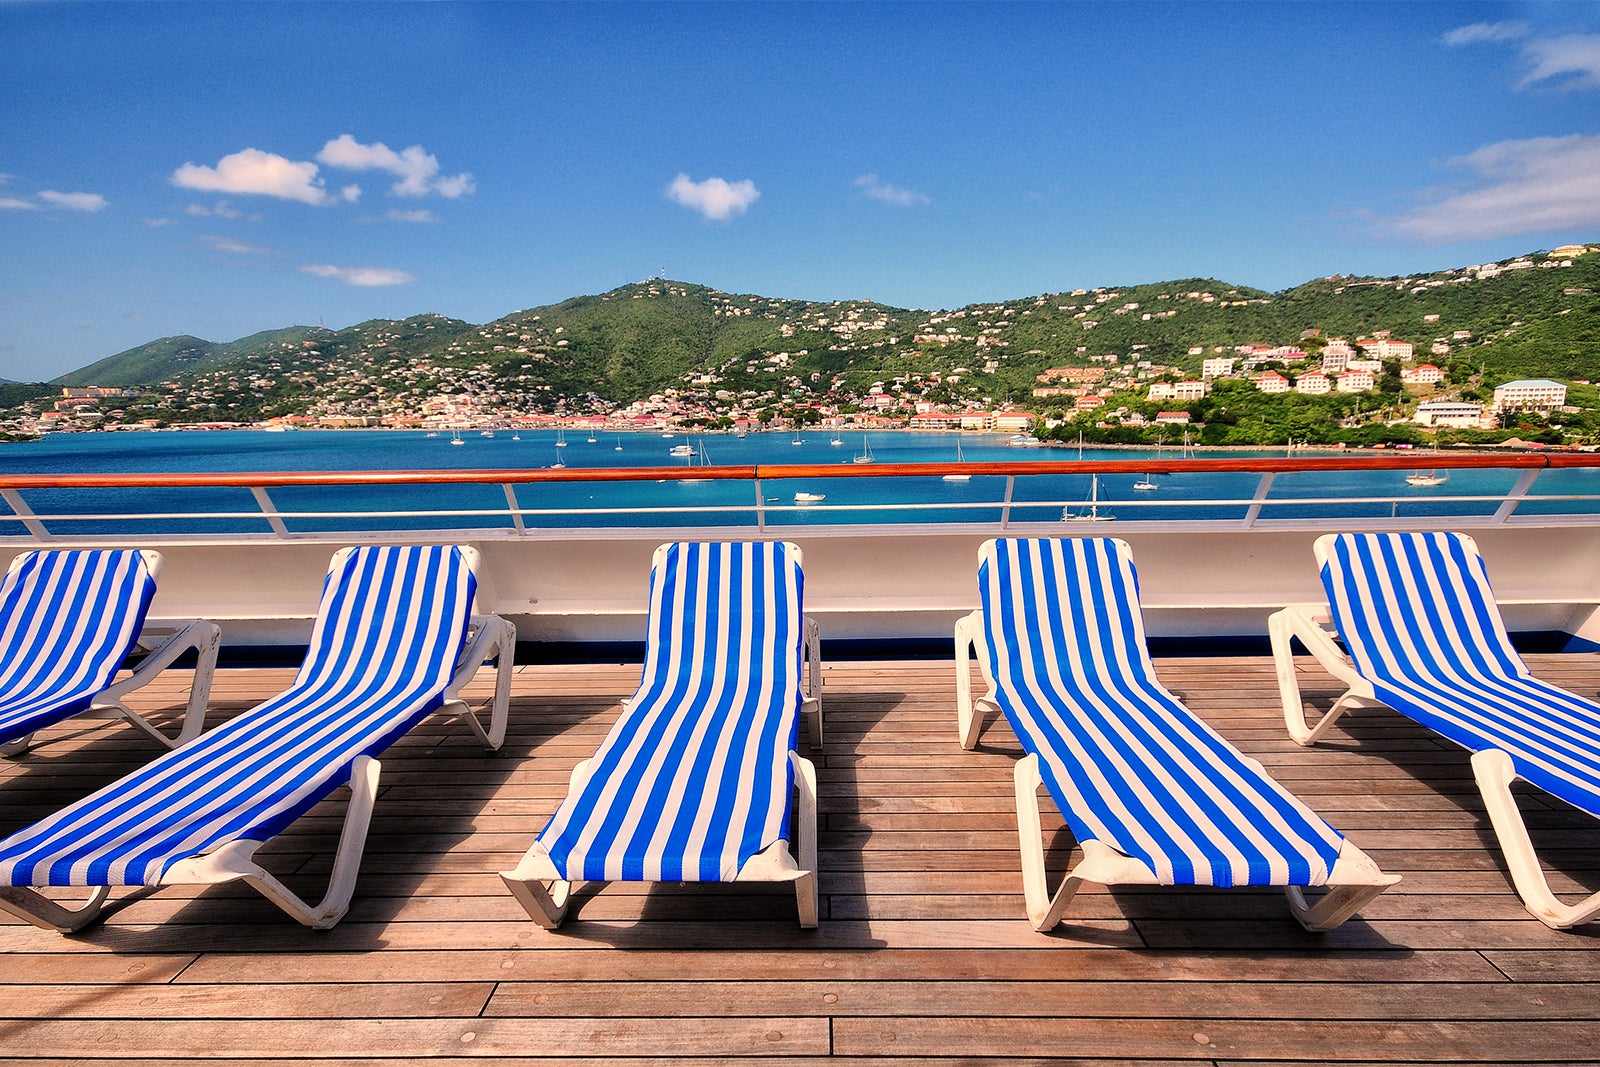 Empty lounge chairs on the top deck of a cruise ship overlooking a tropical island in the Caribbean